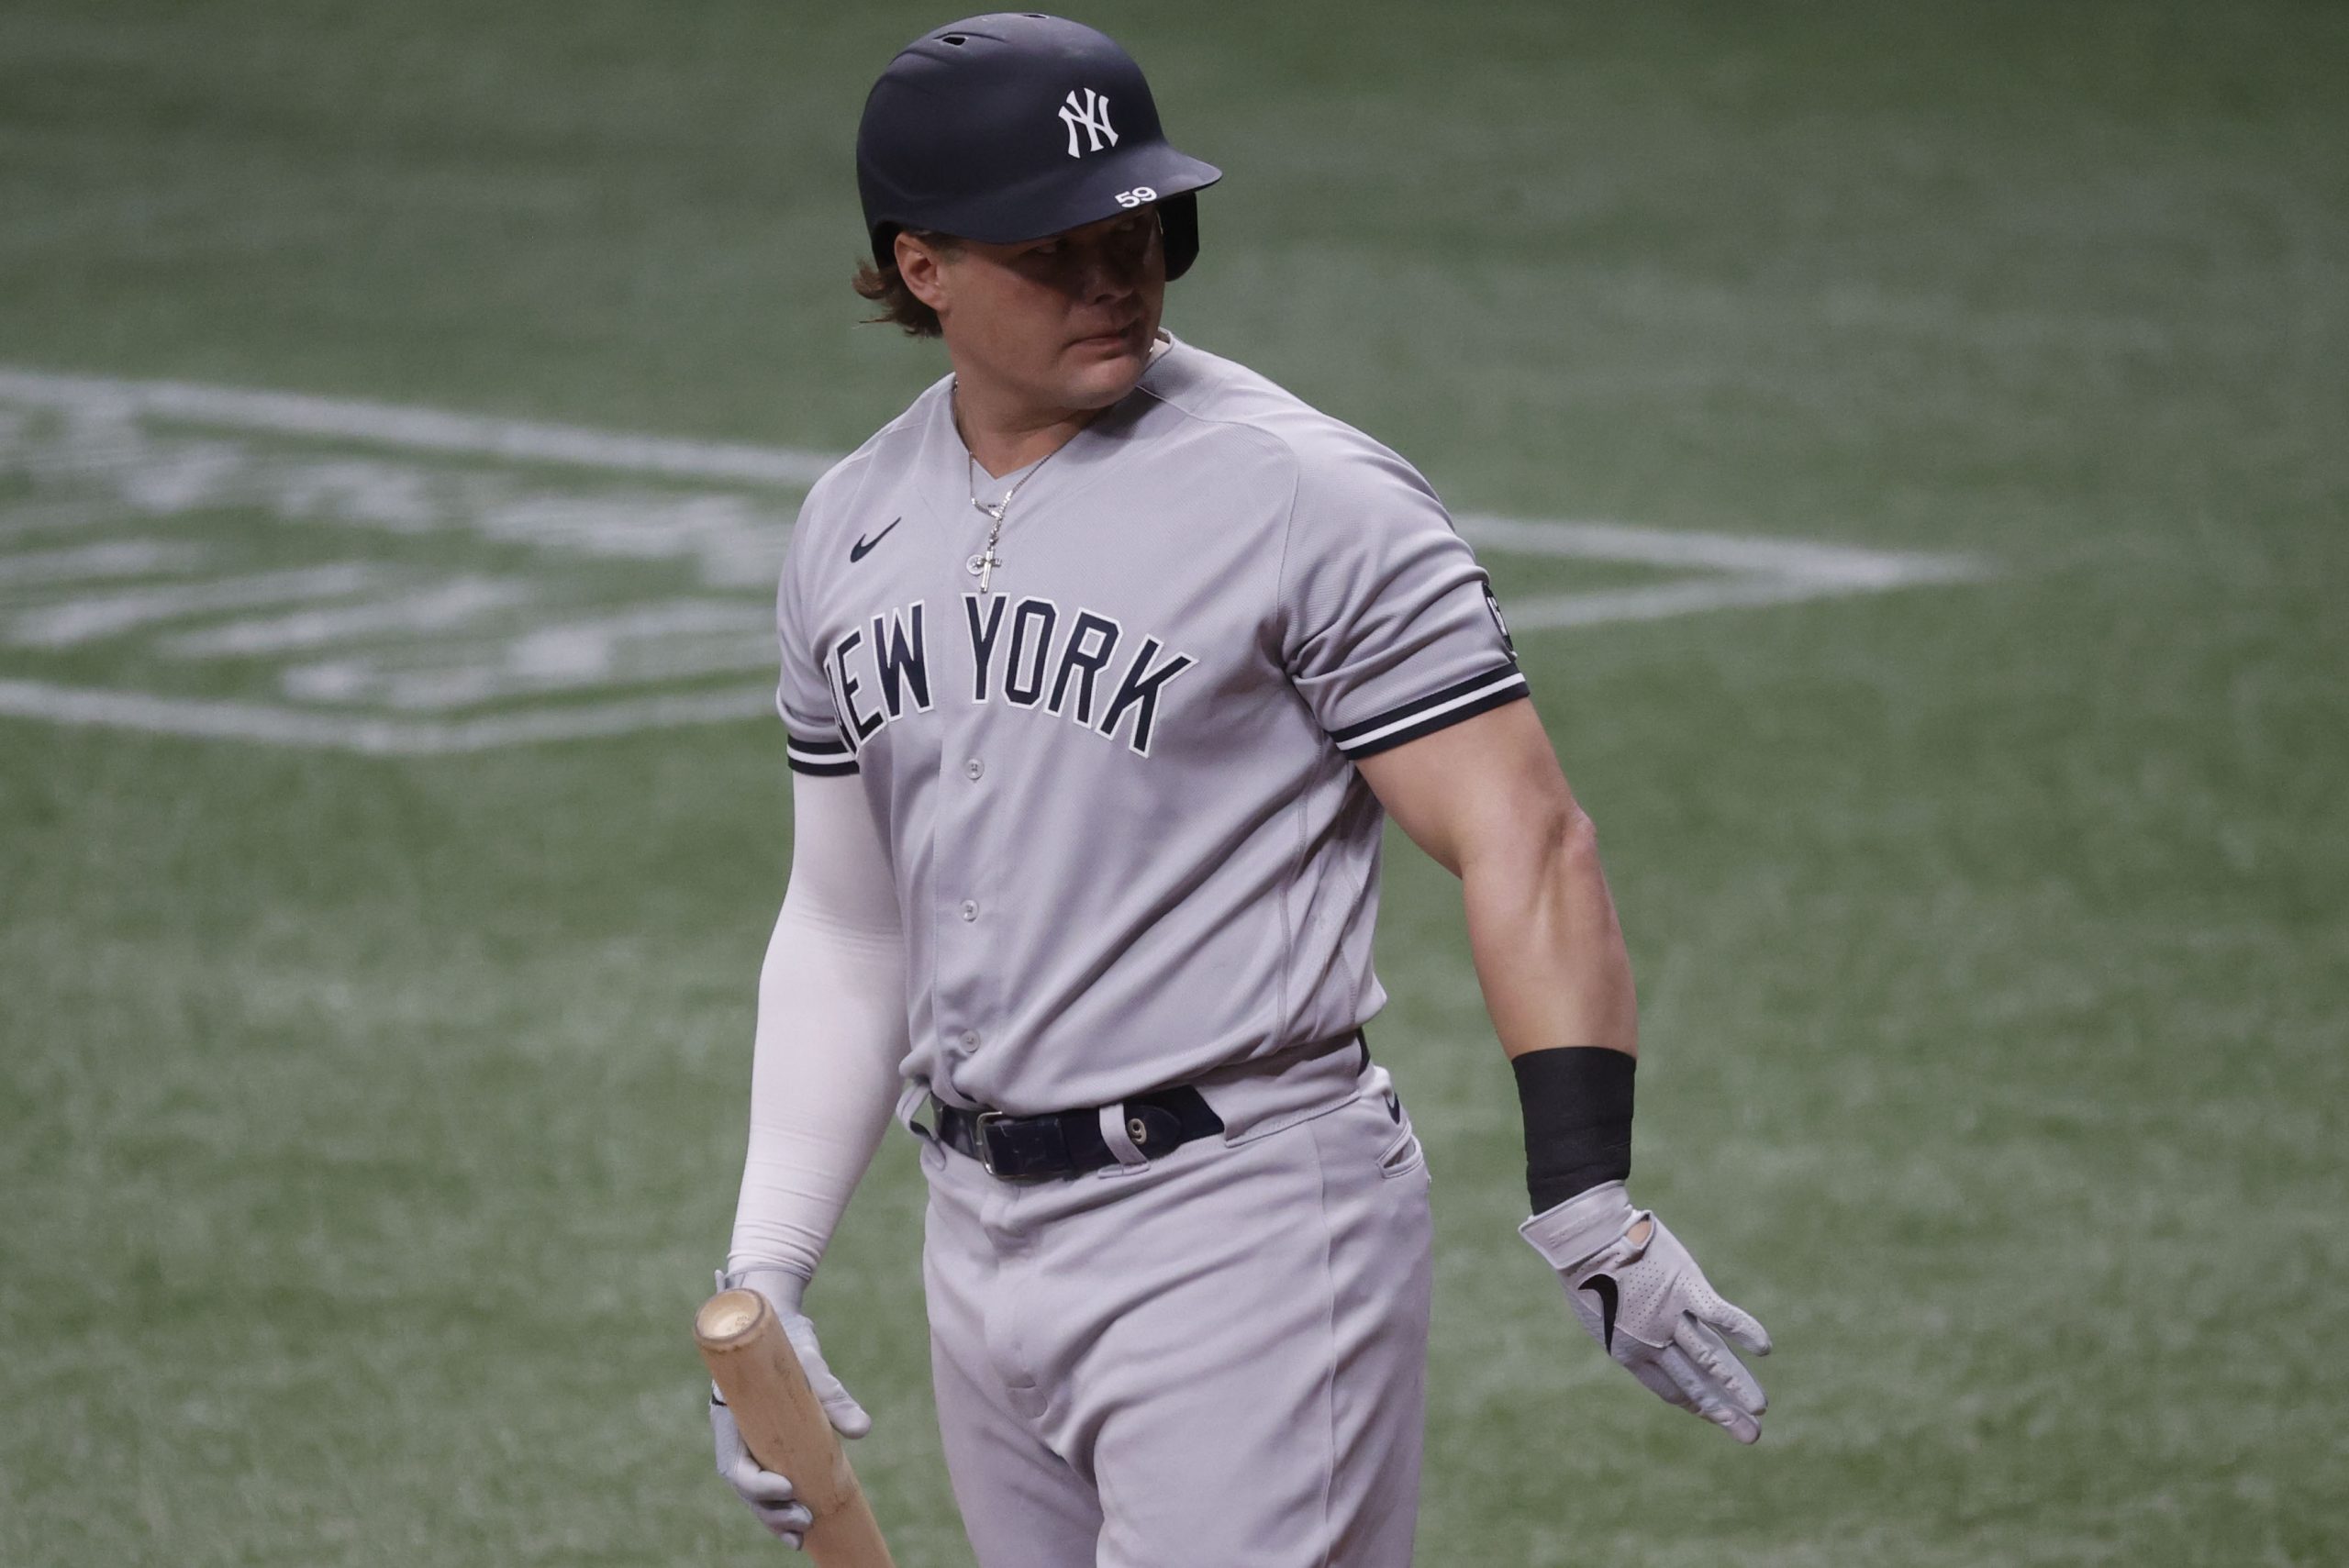 Luke Voit wore wild uniform and belted HR for Syracuse Mets